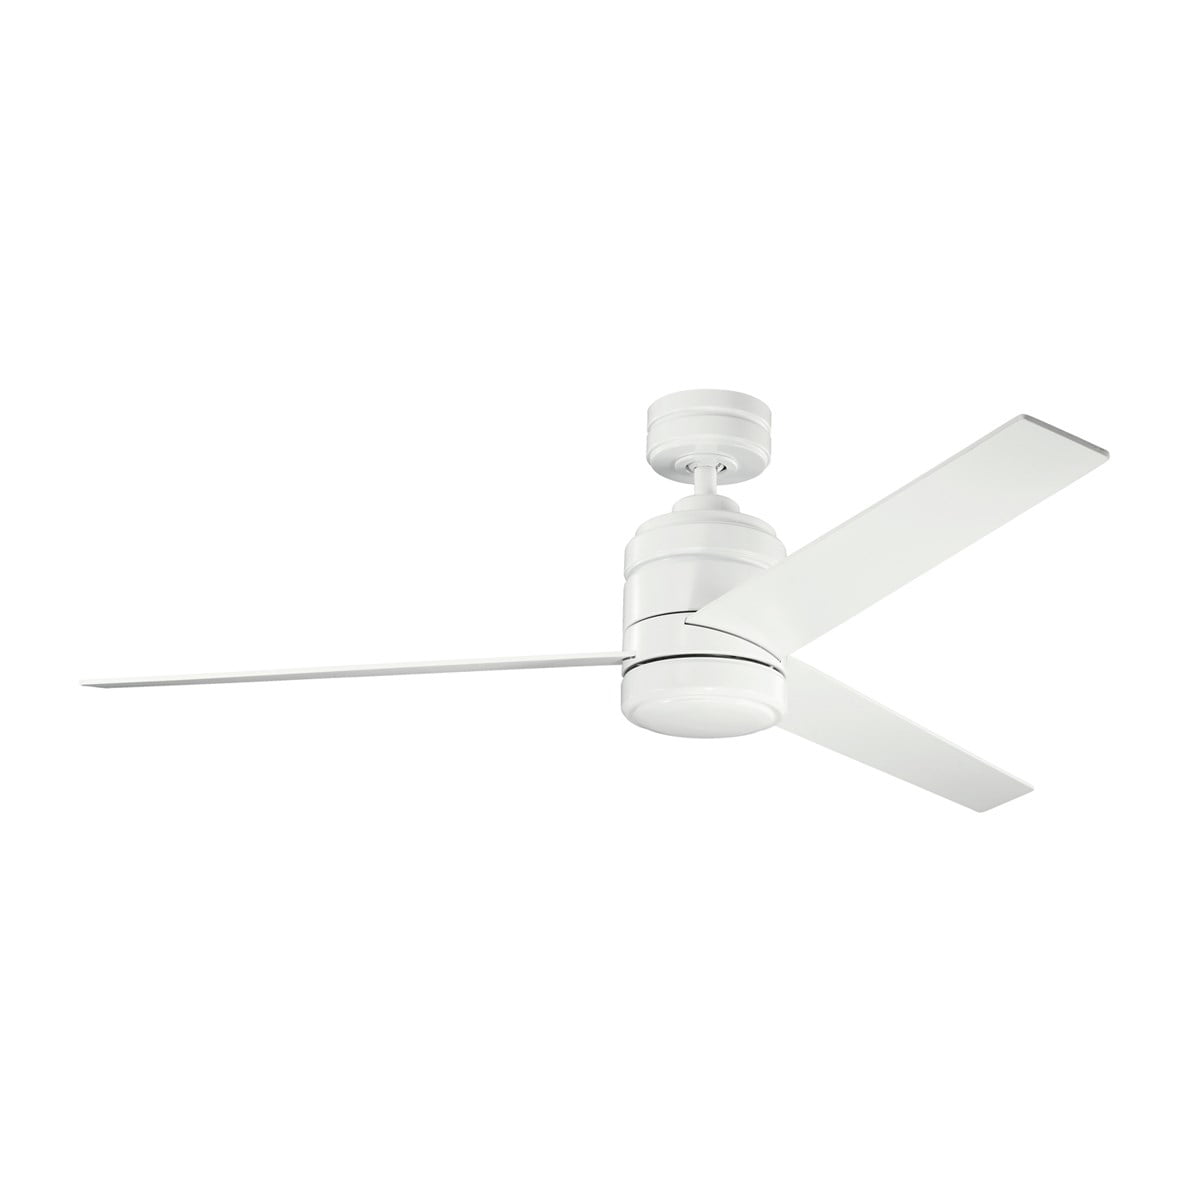 Kichler 300146WH Arkwright 78 in. Indoor Ceiling Fan Base/Motor Only - White - Energy Star - 1